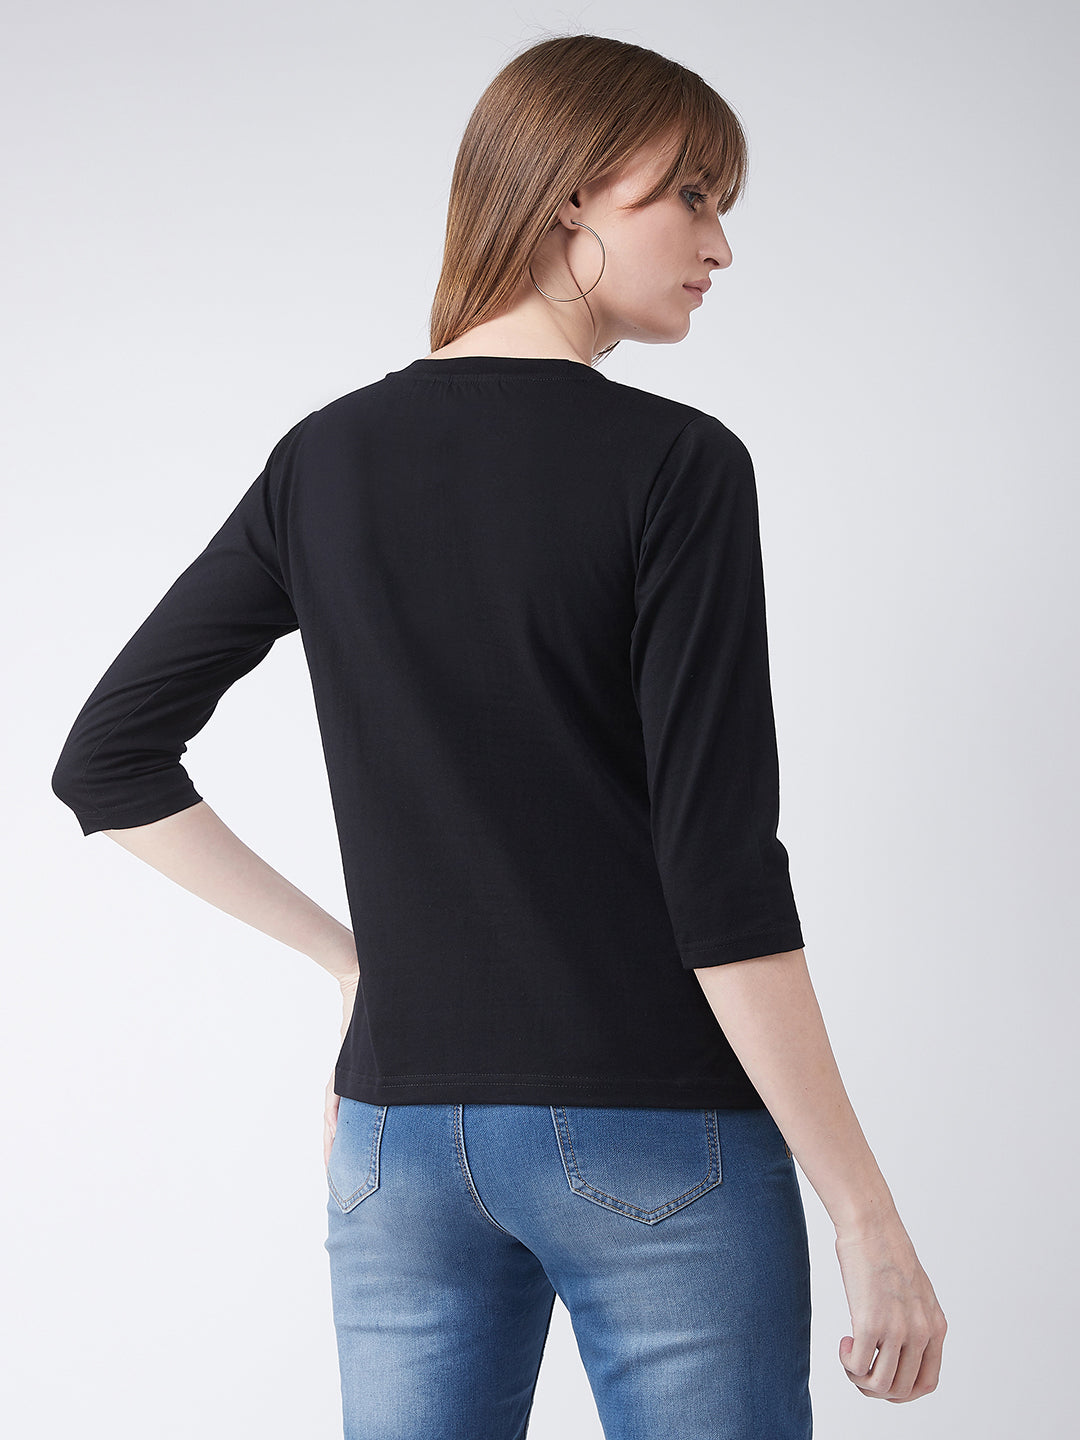 Women's Black Round Neck 3/4 Sleeves Solid Basic Top